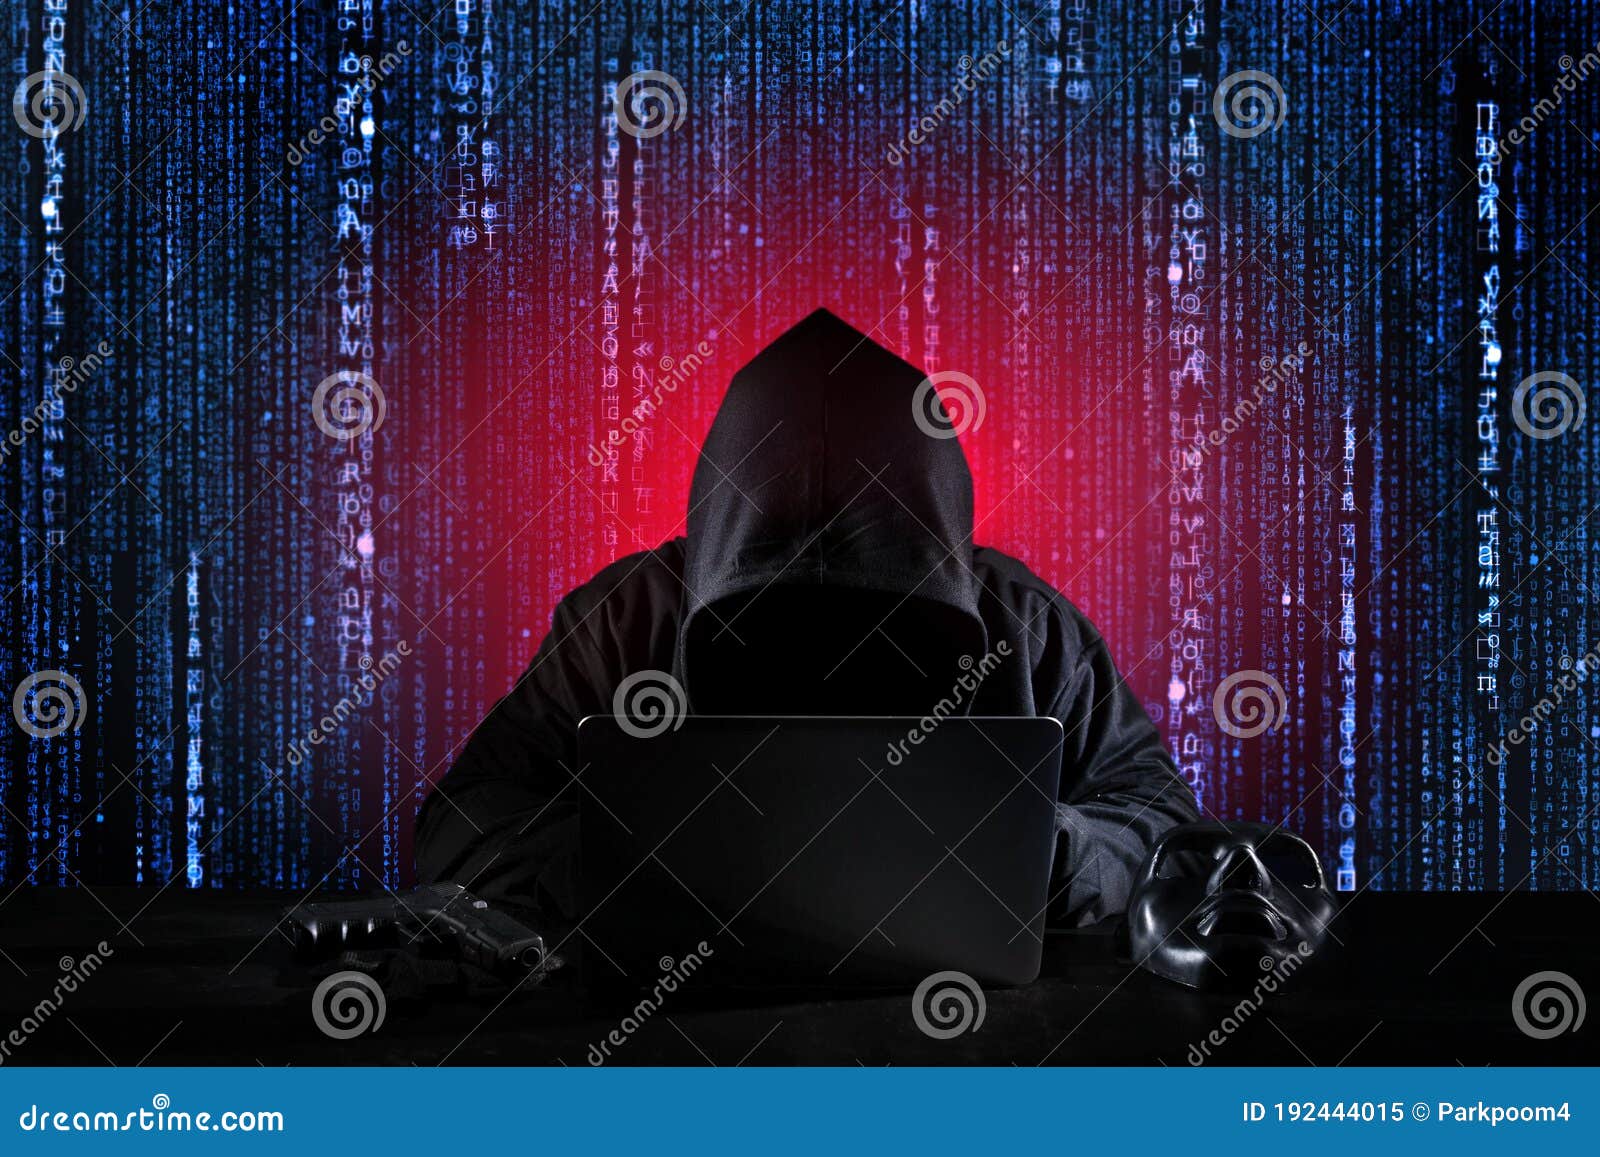 dangerous hacker man in black hooded, masked and gun using computer, breaking into security data and corporate server. he stealing